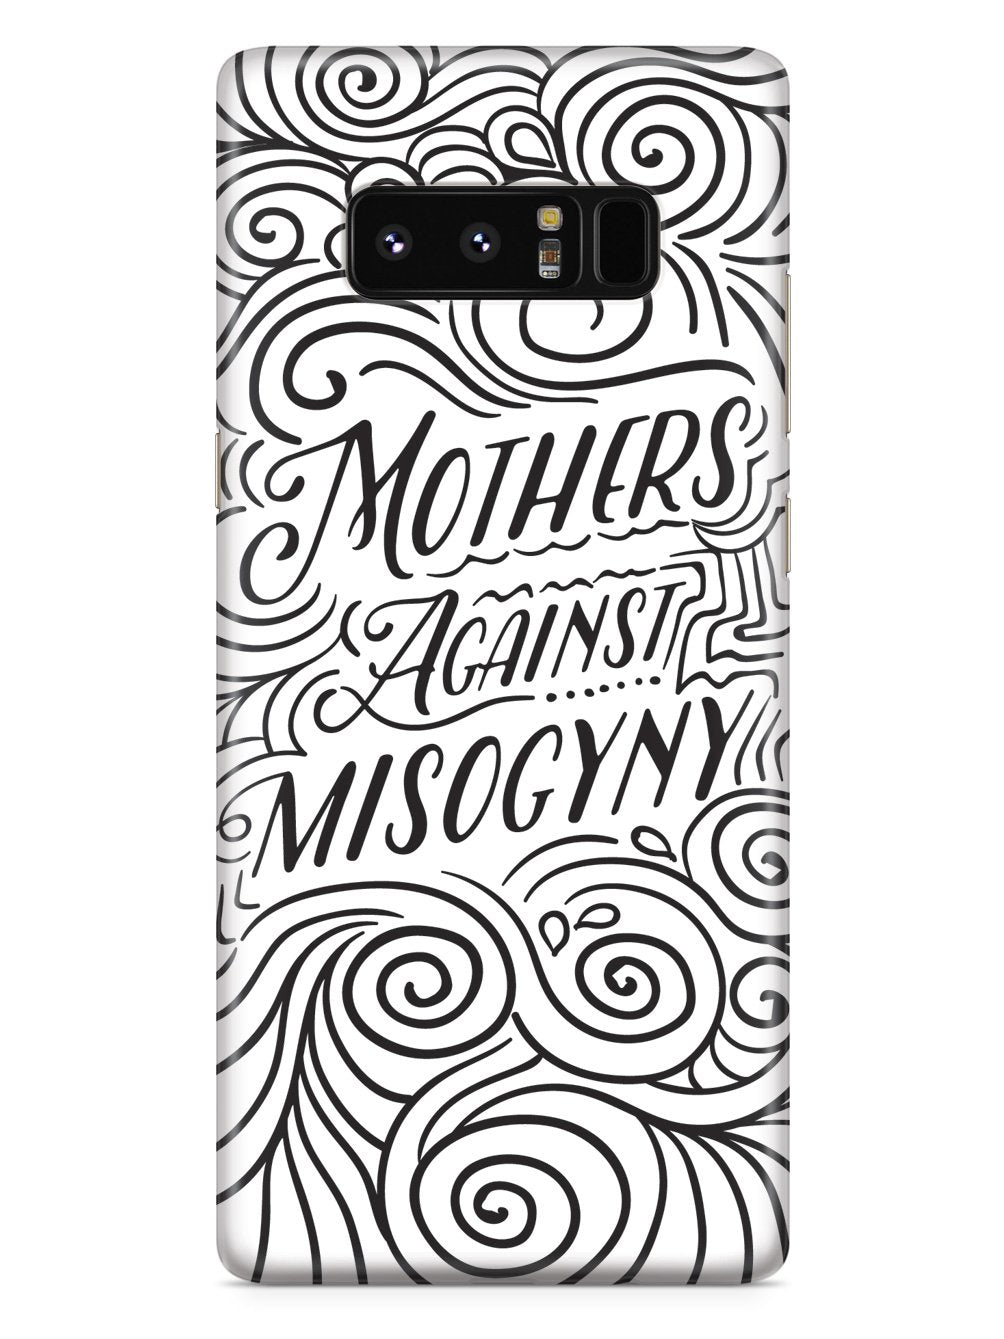 Mothers Against Misogyny - White Case - pipercleo.com